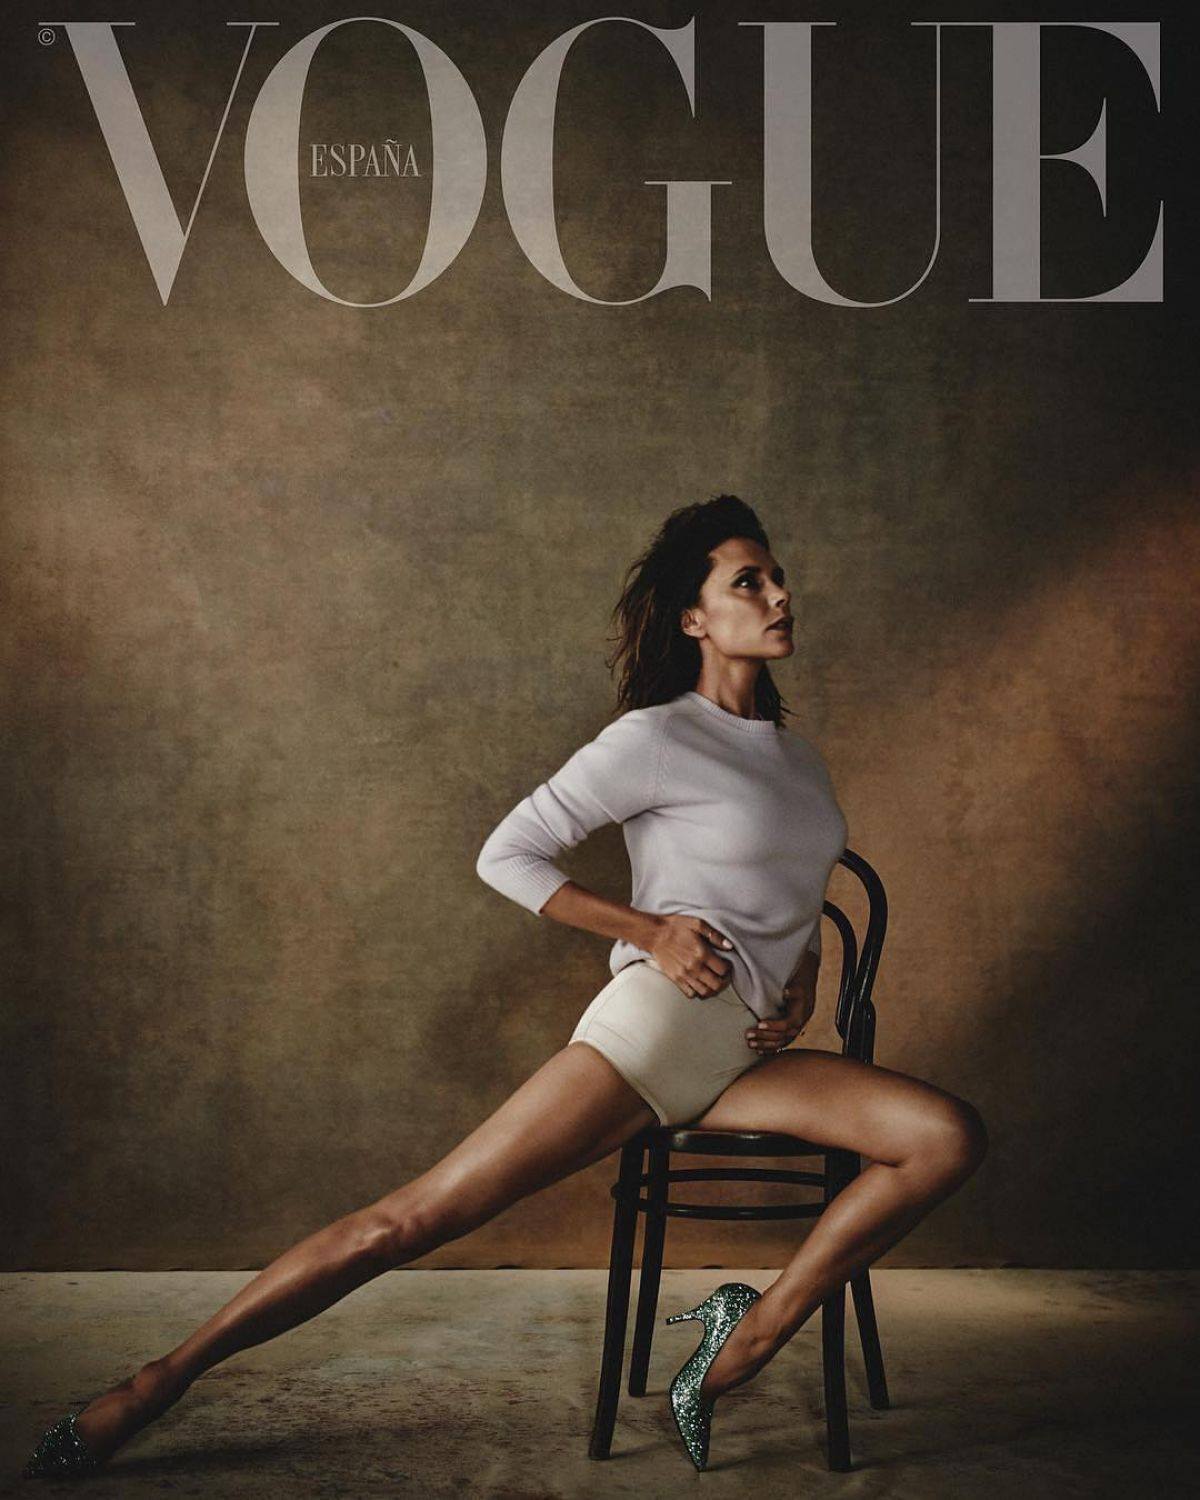 Vogue Spain February 2018 Victoria Beckham by Boo George